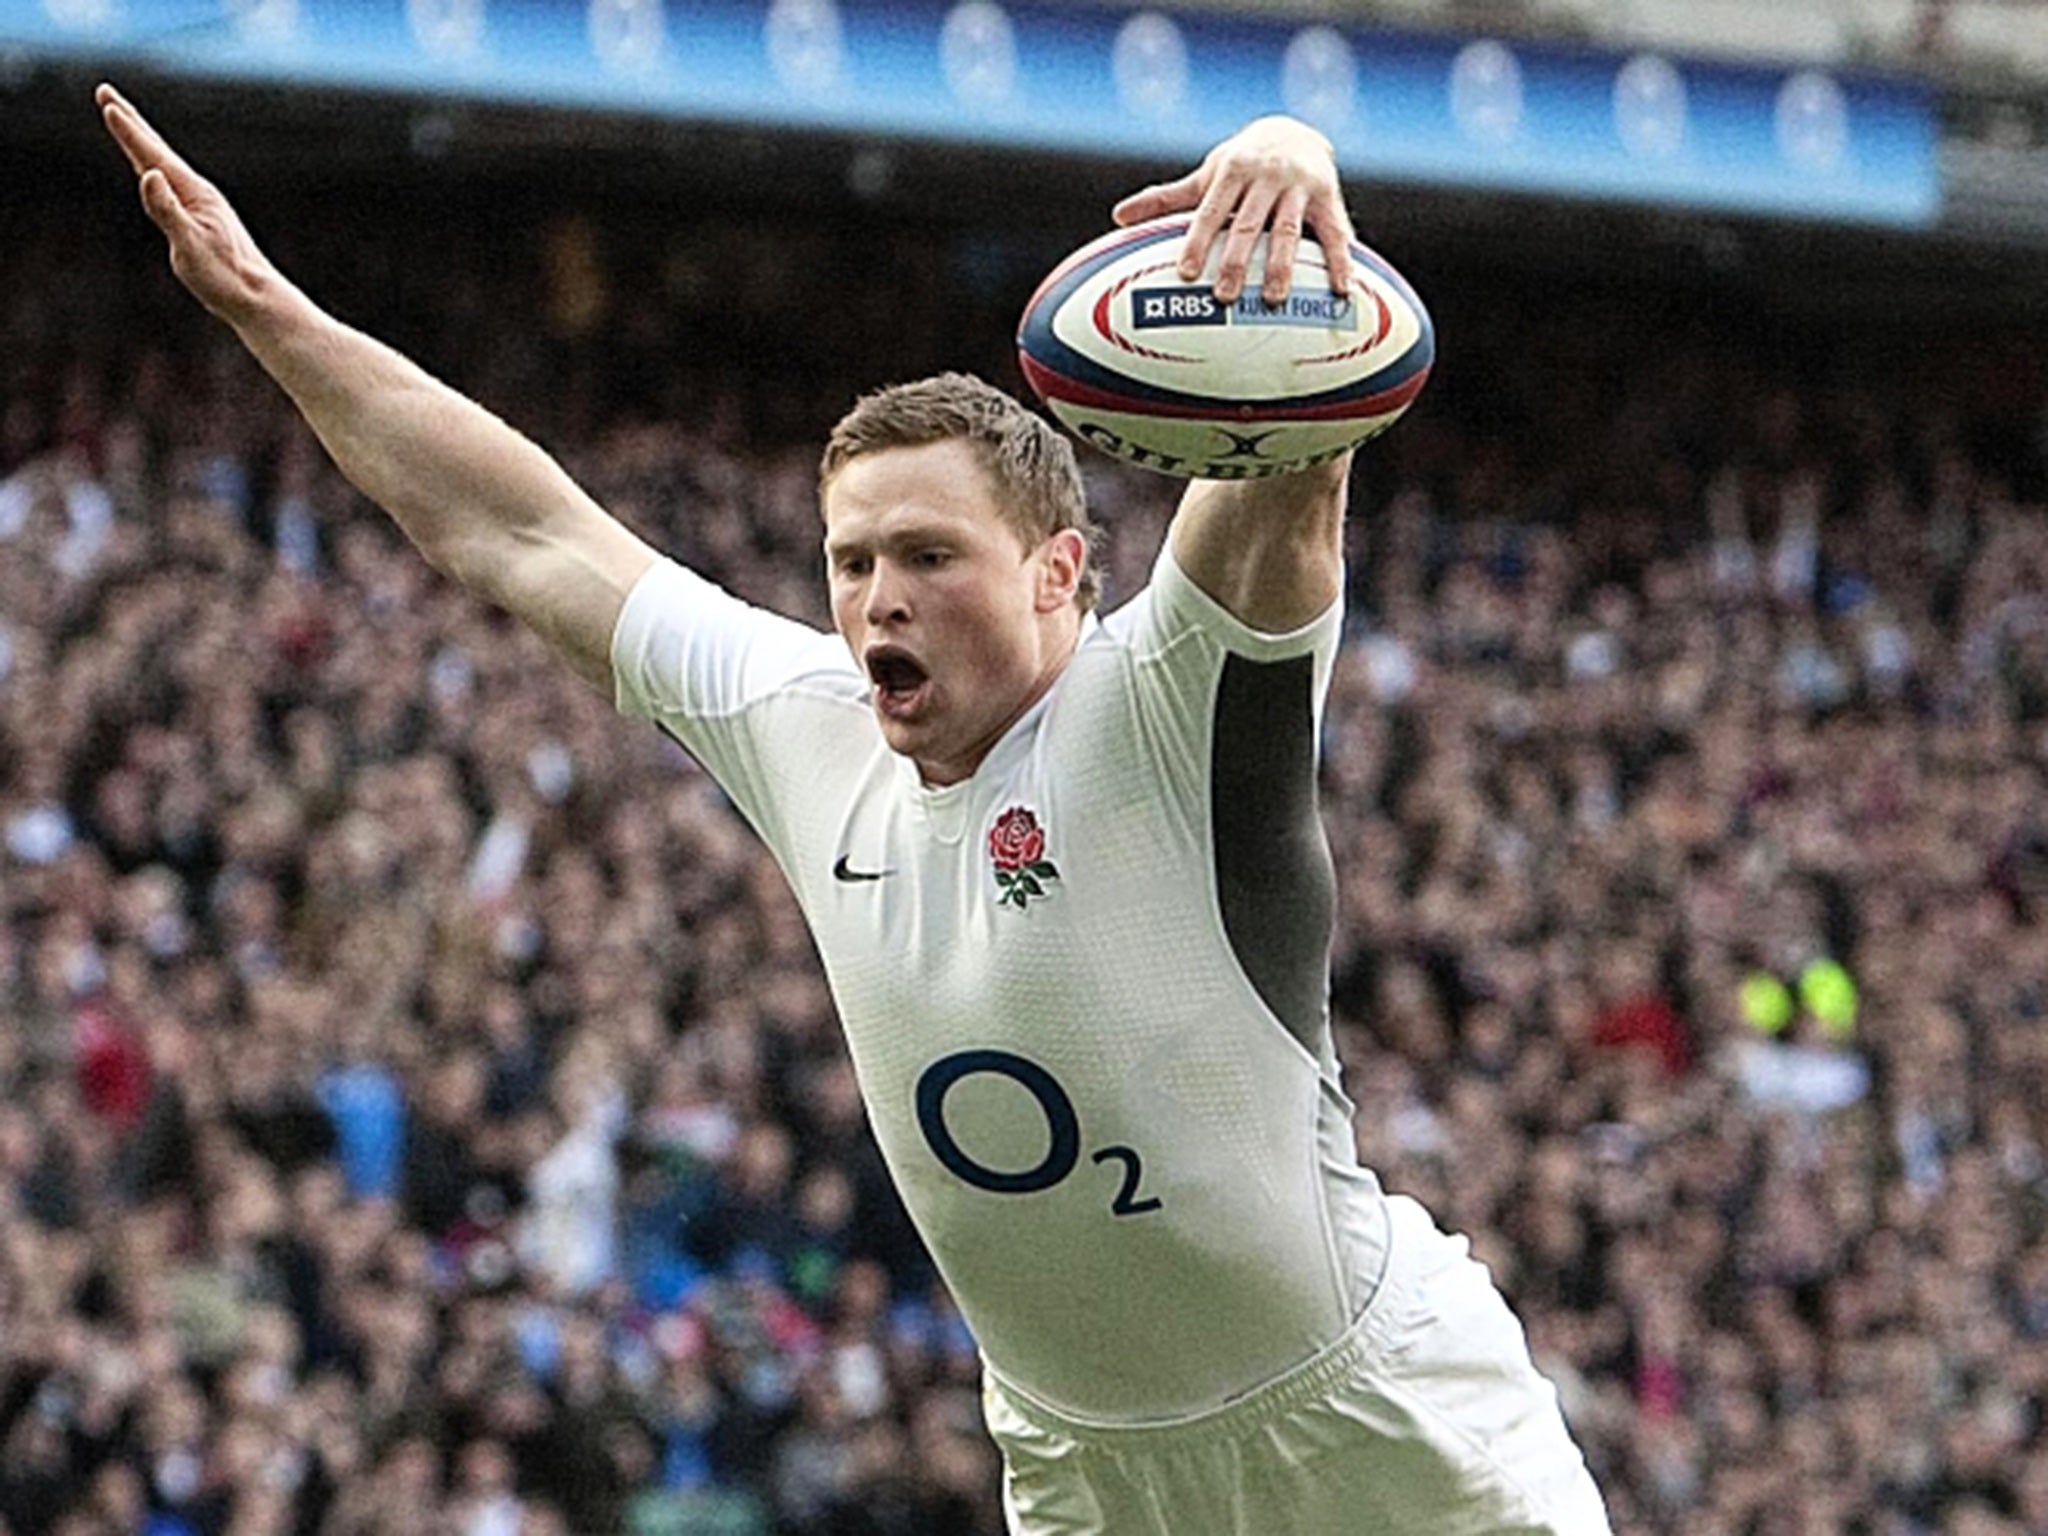 Chris Ashton has been recalled by England after adding some ‘meat and bones’ to his undoubted attacking flair